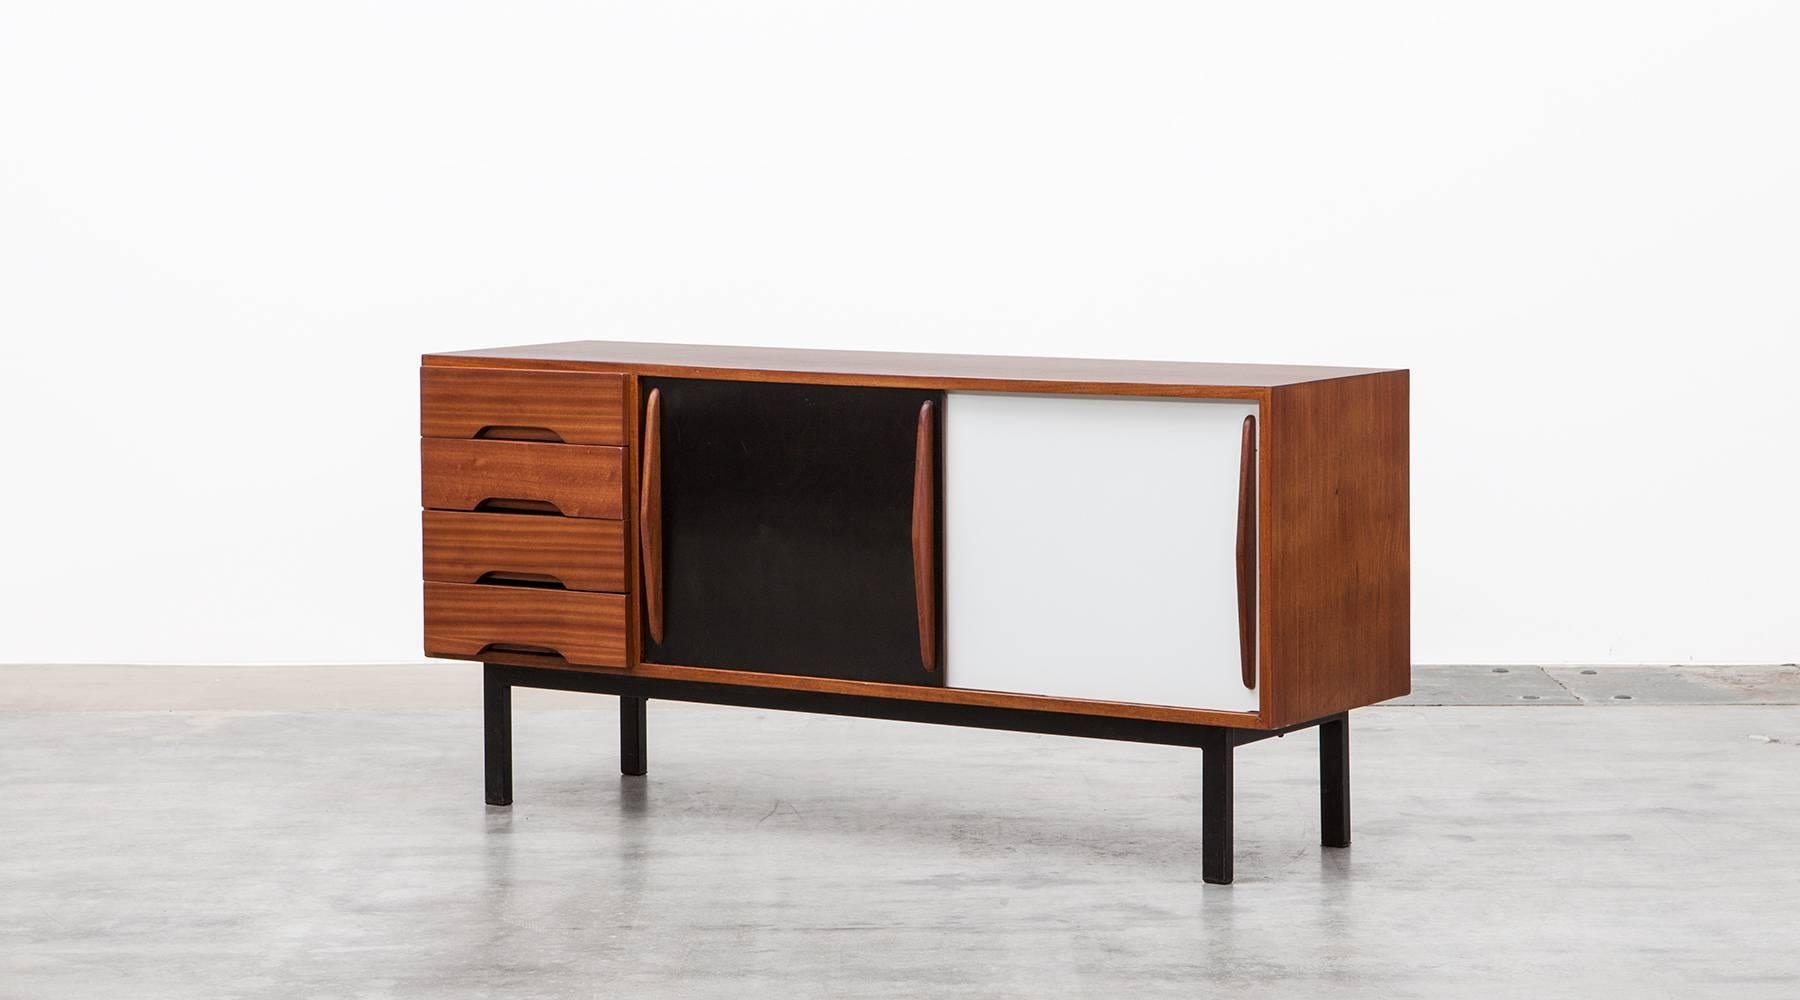 Beautiful and really rare Charlotte Perriand sideboard edited by Steph Simon. This piece is made out of mahogany and comes with four drawers and two laminate sliding doors in black and white. The sideboard is in very good original condition with